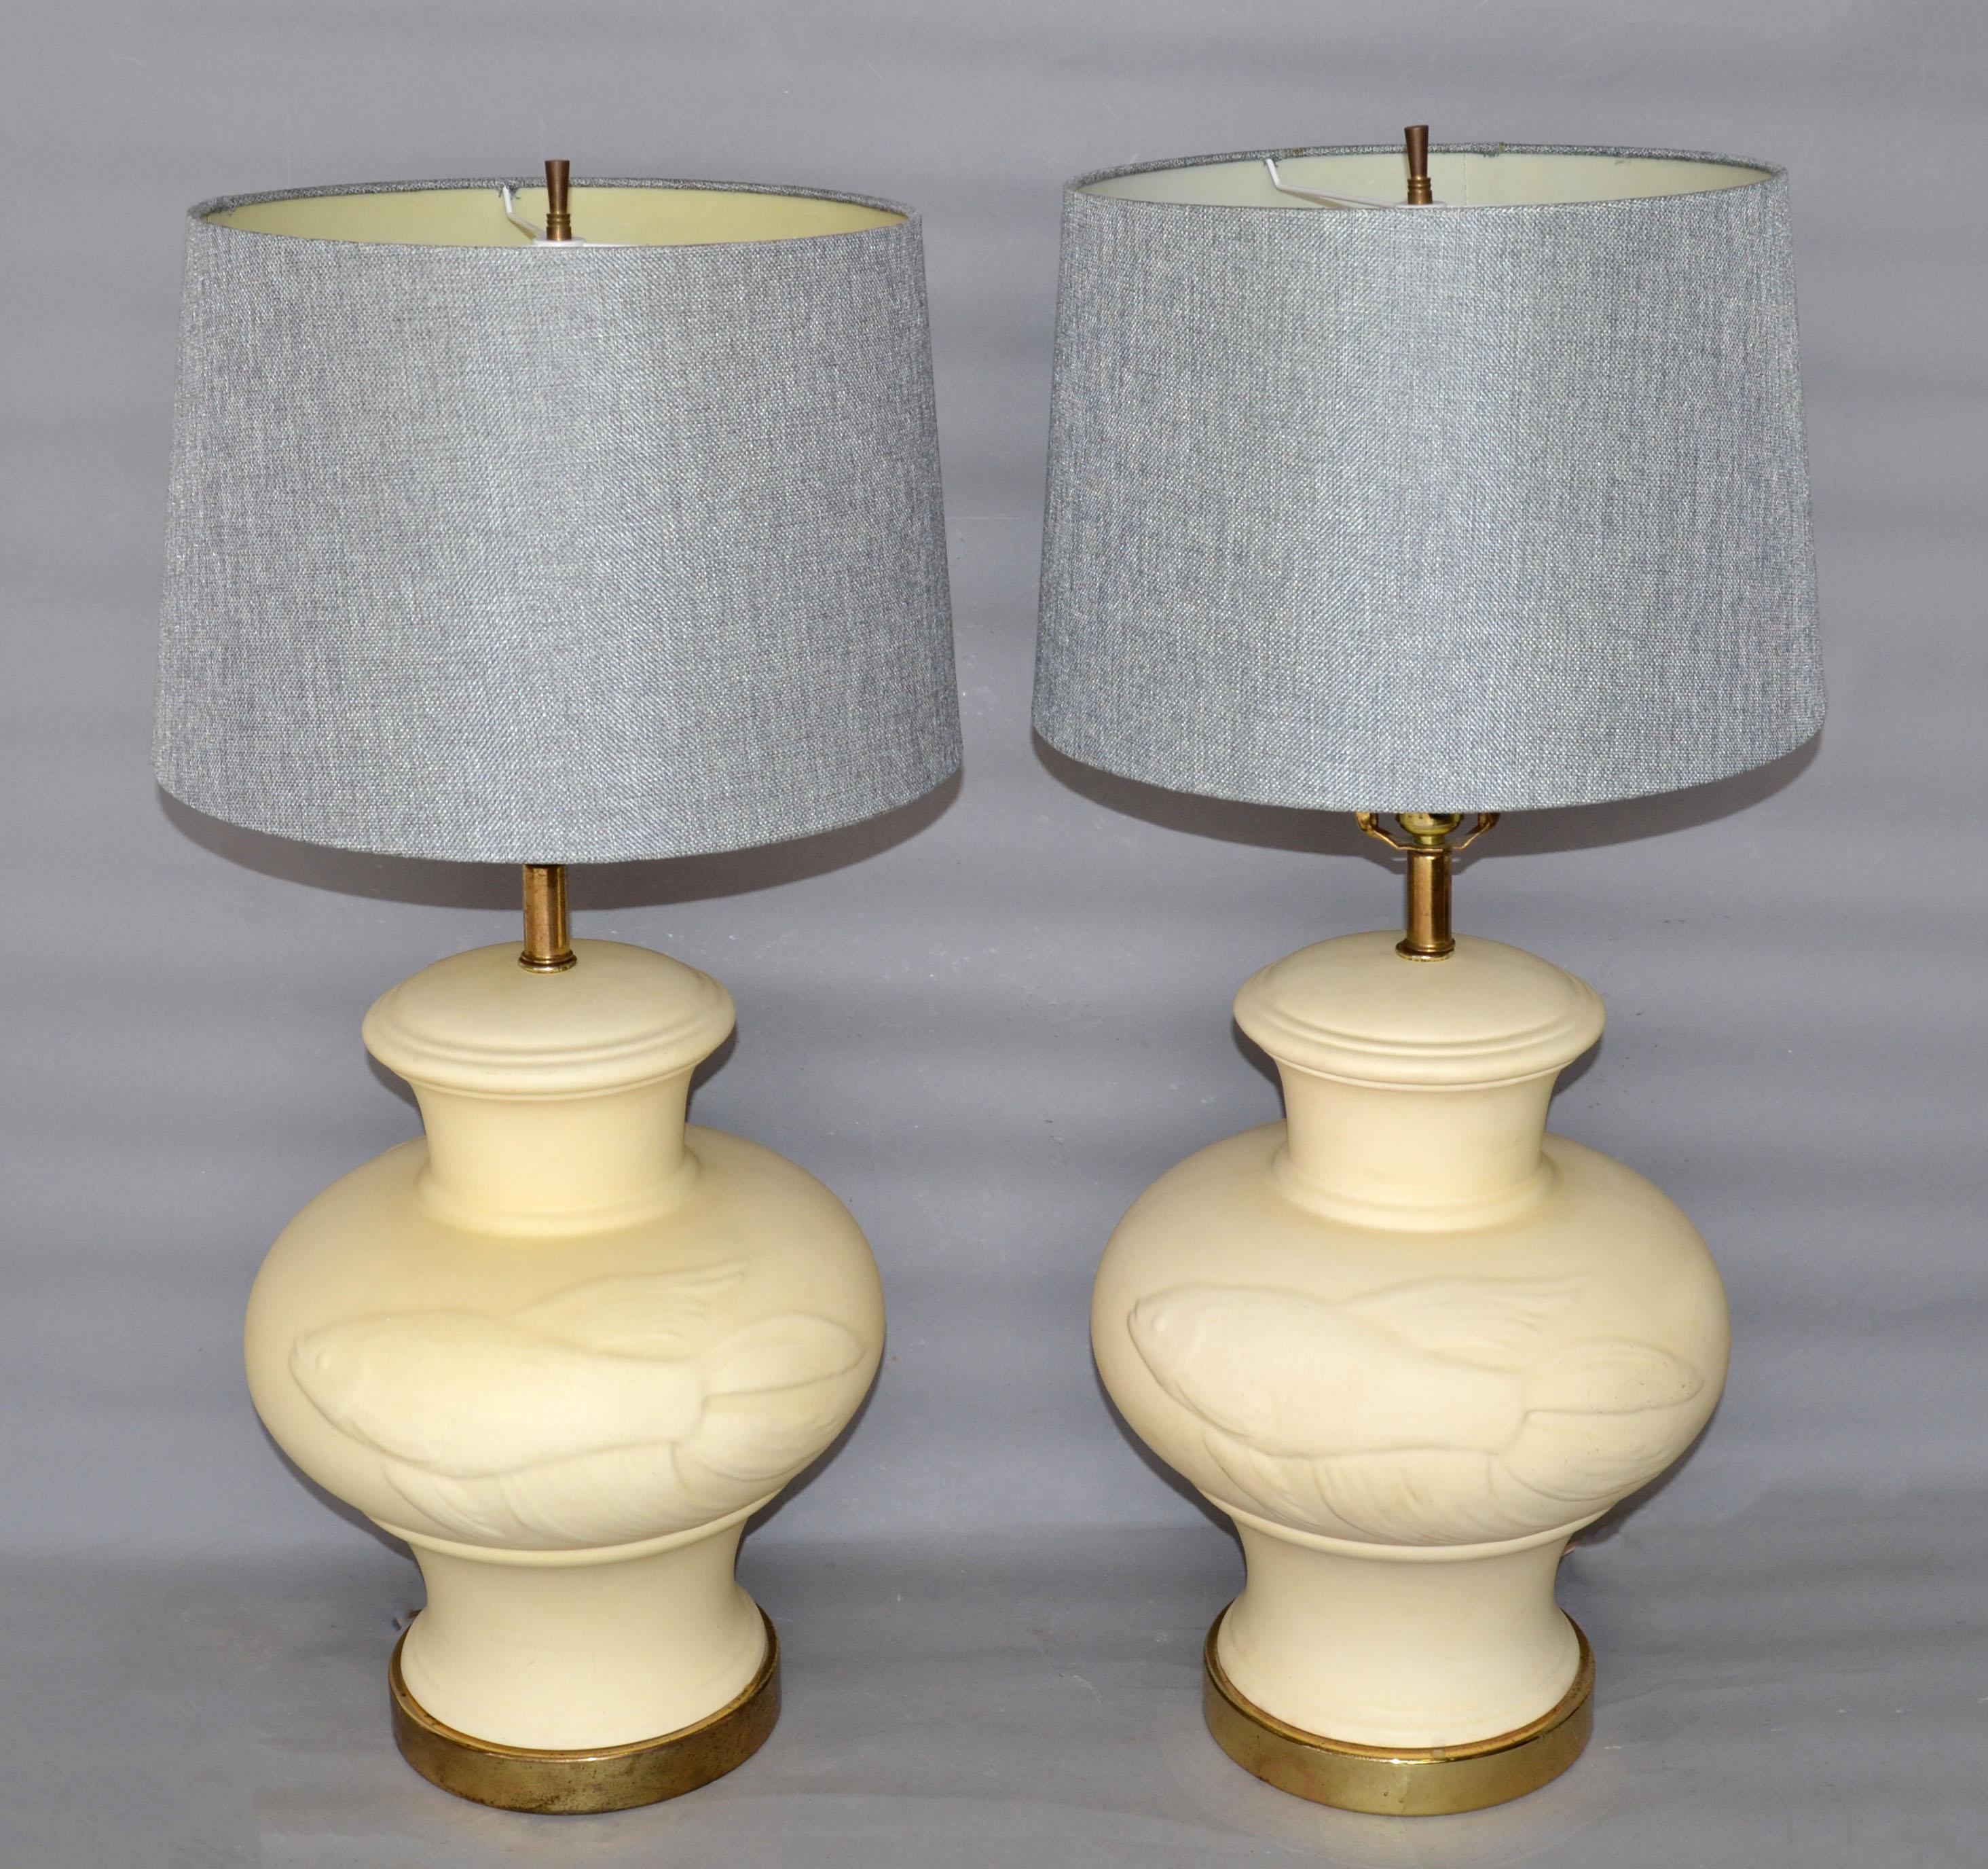 1970 Chinese Inspired Beige Ceramic & Brass Table Lamps with Koi Fish Image Pair For Sale 5